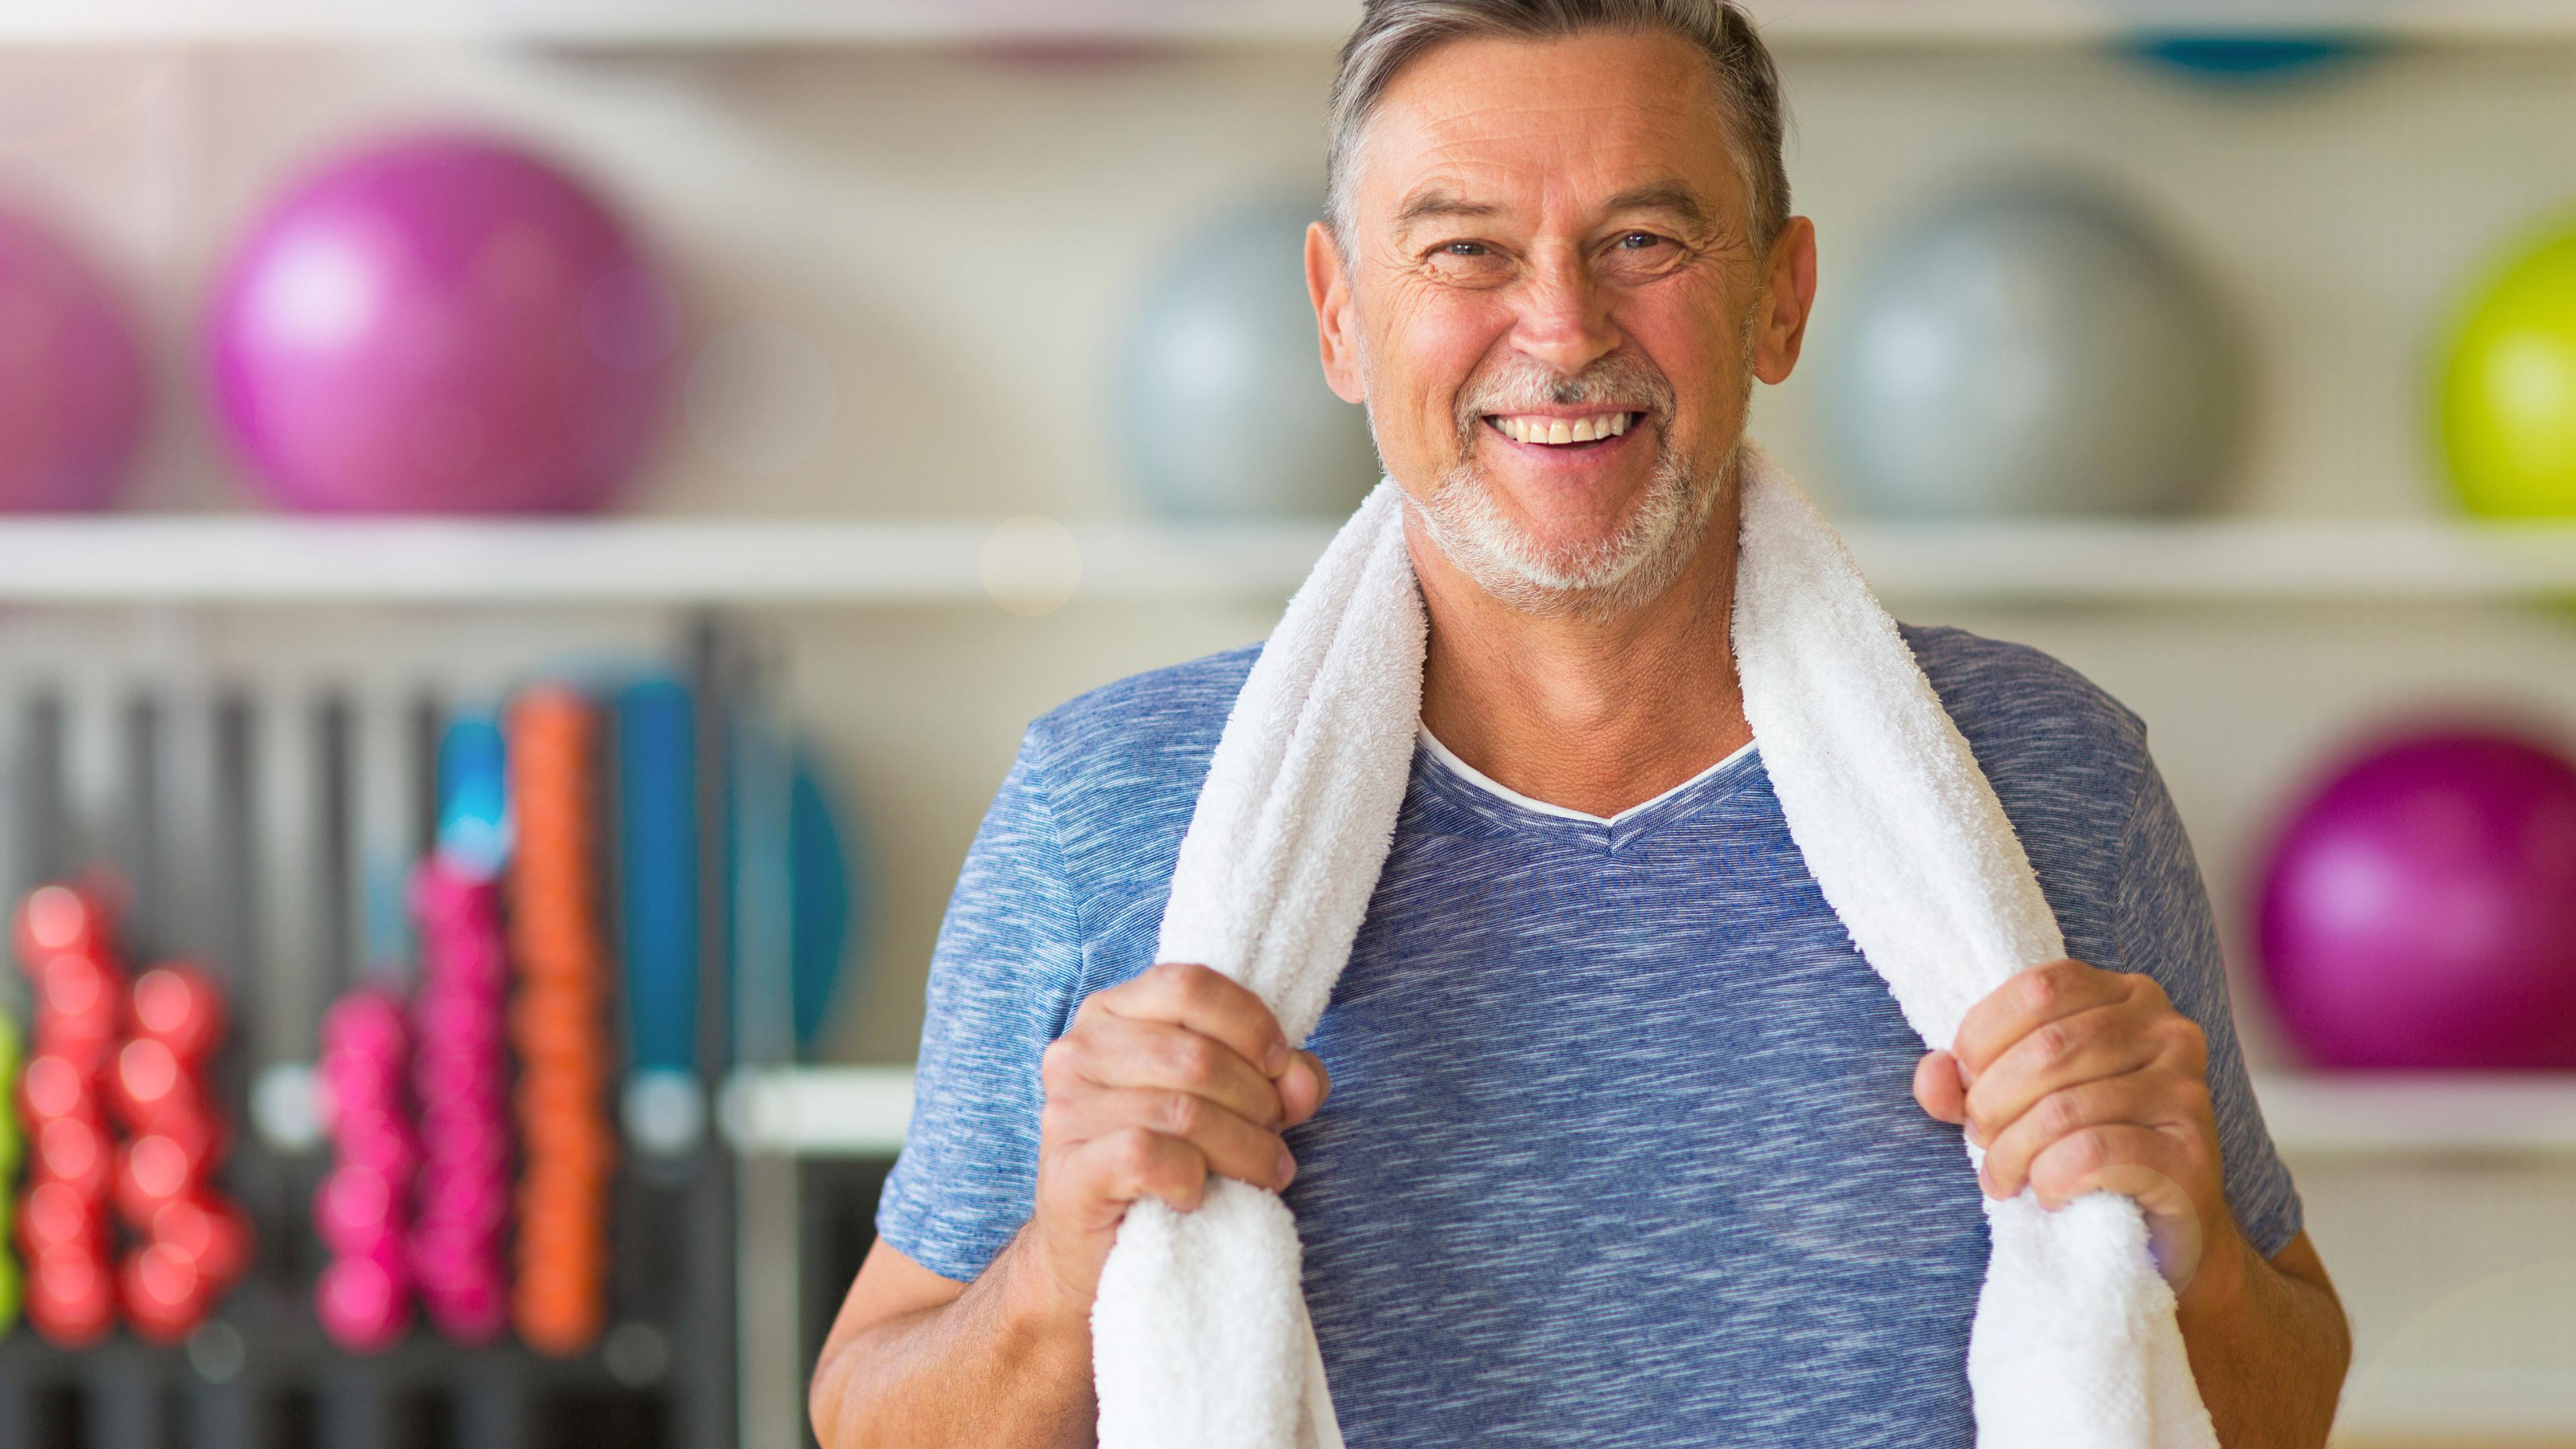 Grandpa at the gym holding towel 